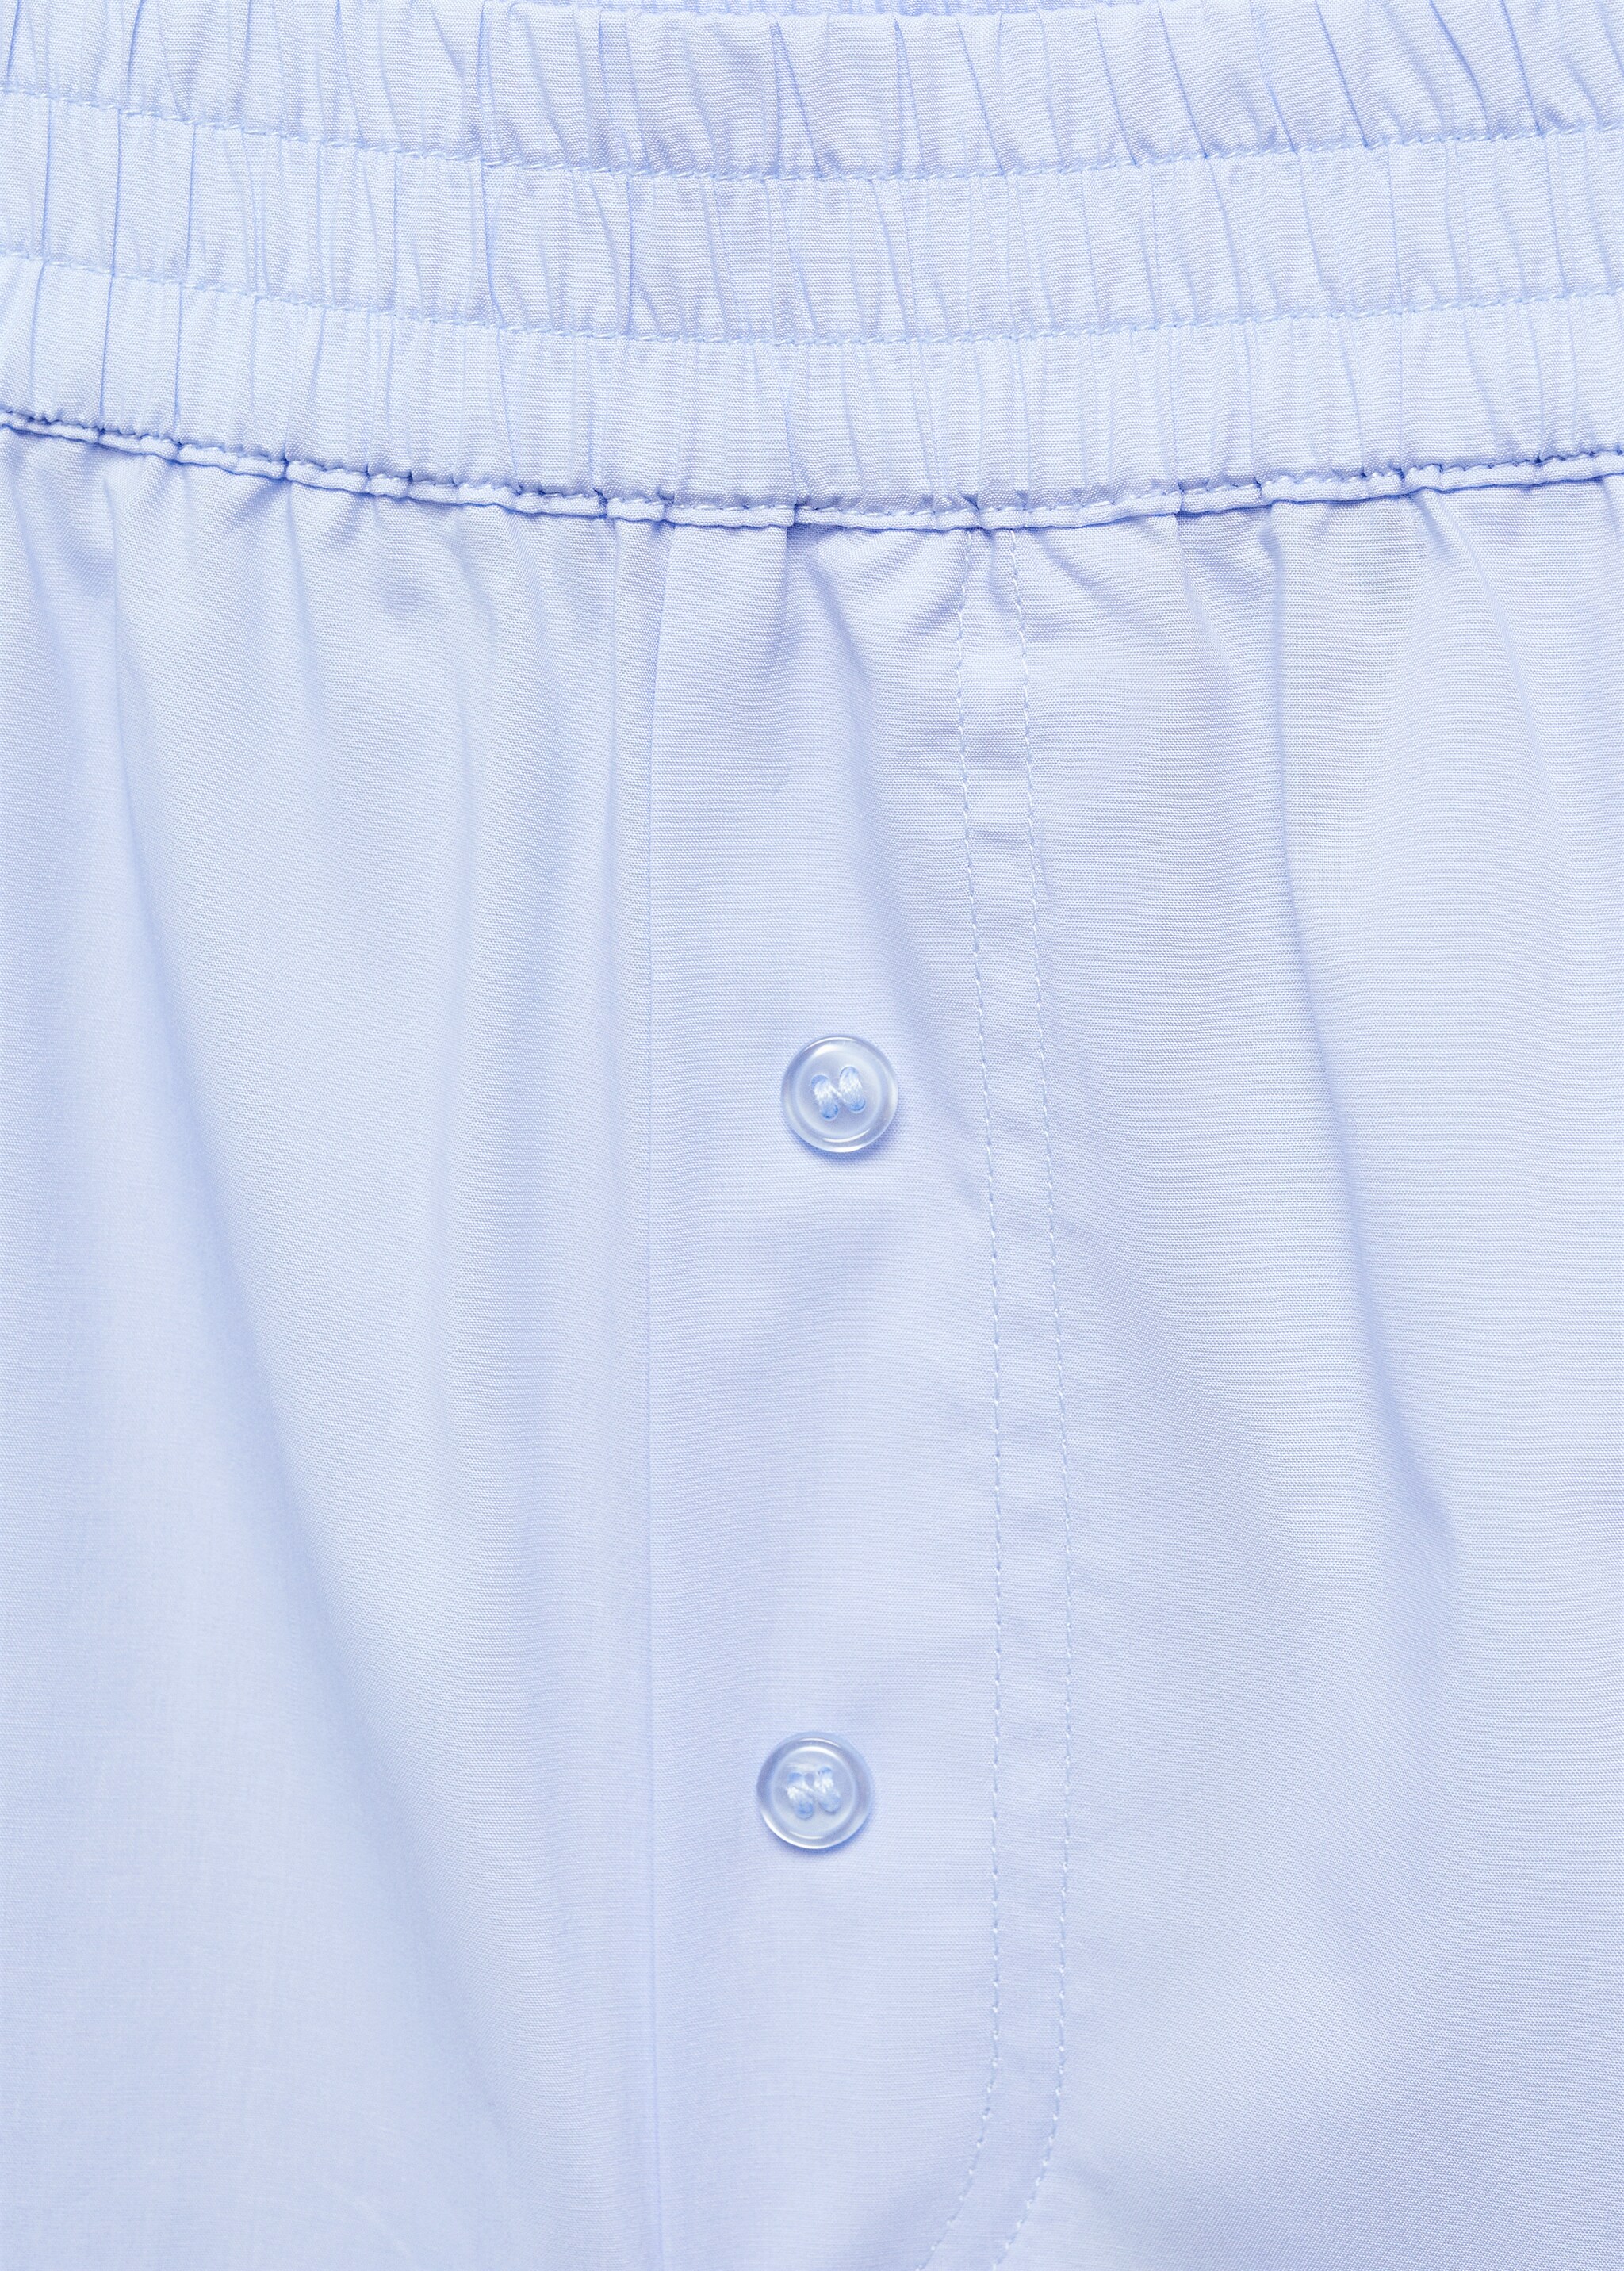 Cotton pyjama shorts with elastic waist - Details of the article 8